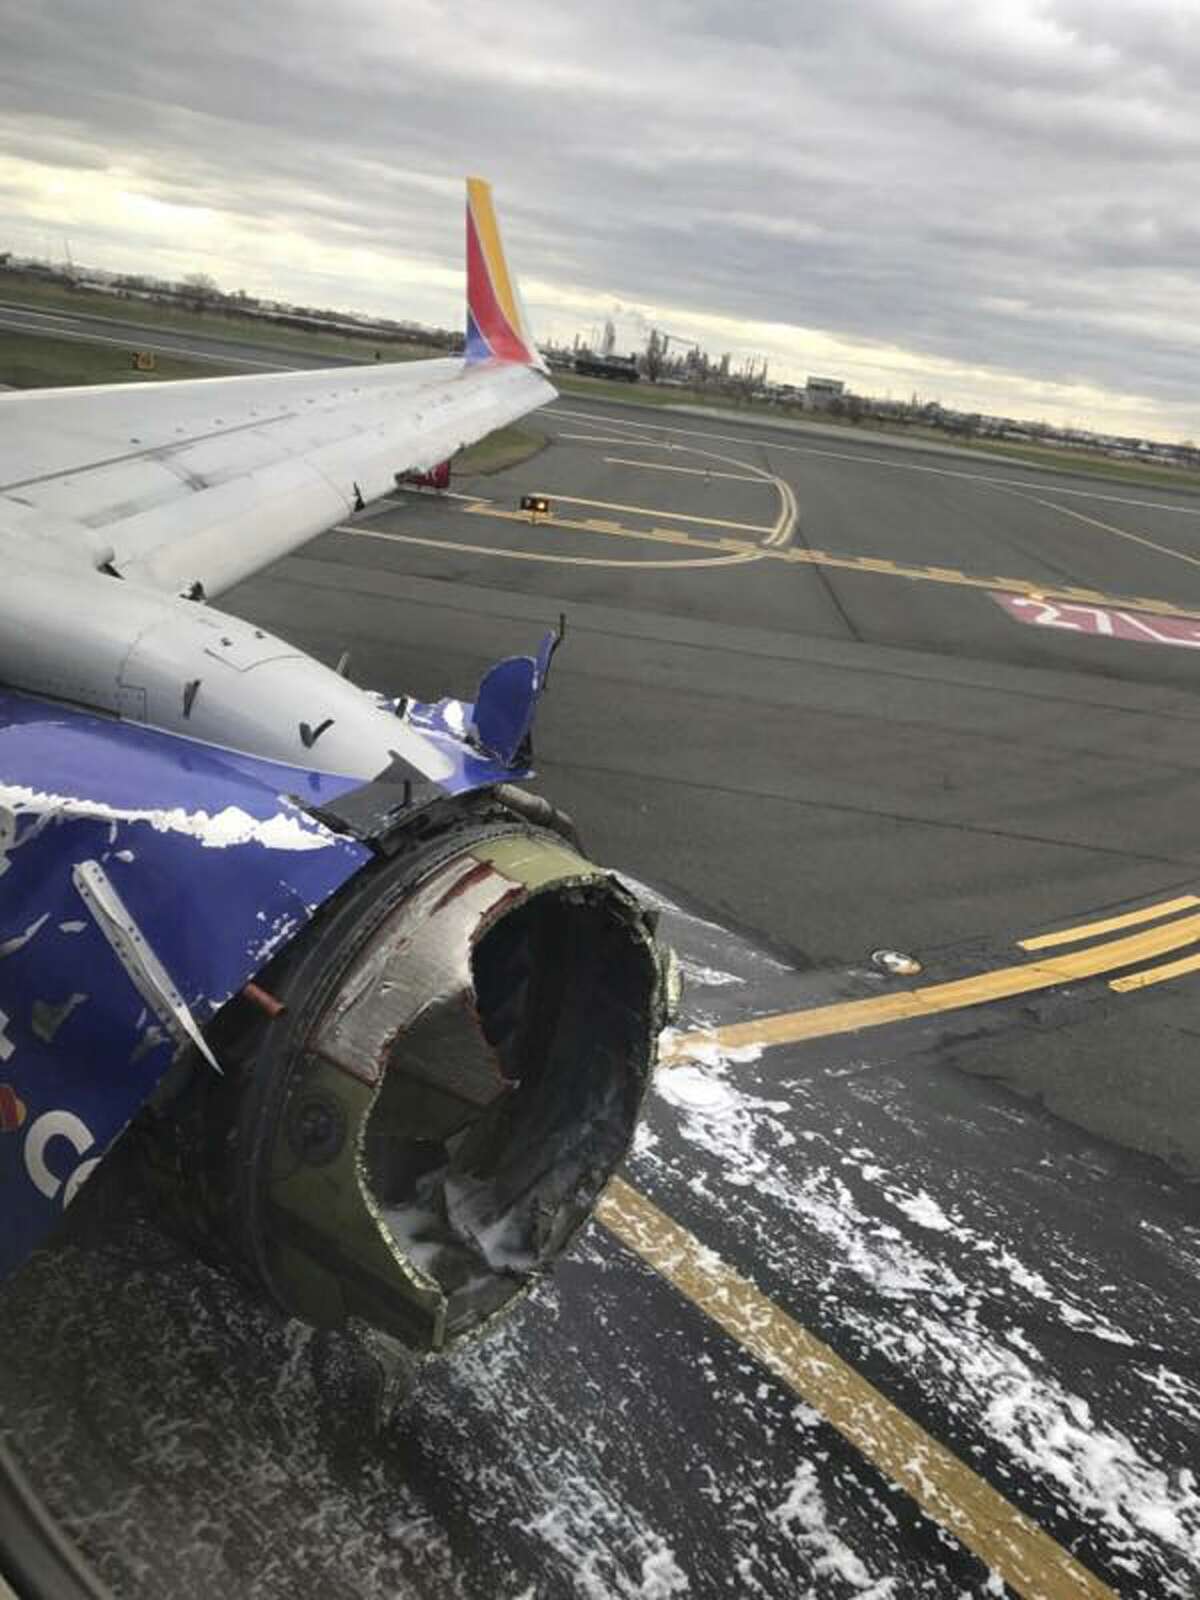 This April 17, 2018 photo provided by Marty Martinez shows the jet engine casing of a Southwest Airlines airplane Martinez was a passenger on after pilots of the twin-engine Boeing 737 bound from New York to Dallas with 149 people aboard took it into a rapid descent and made an emergency landing in Philadelphia. A preliminary examination of the engine showed evidence of "metal fatigue," according to the National Transportation Safety Board. (Marty Martinez via AP)